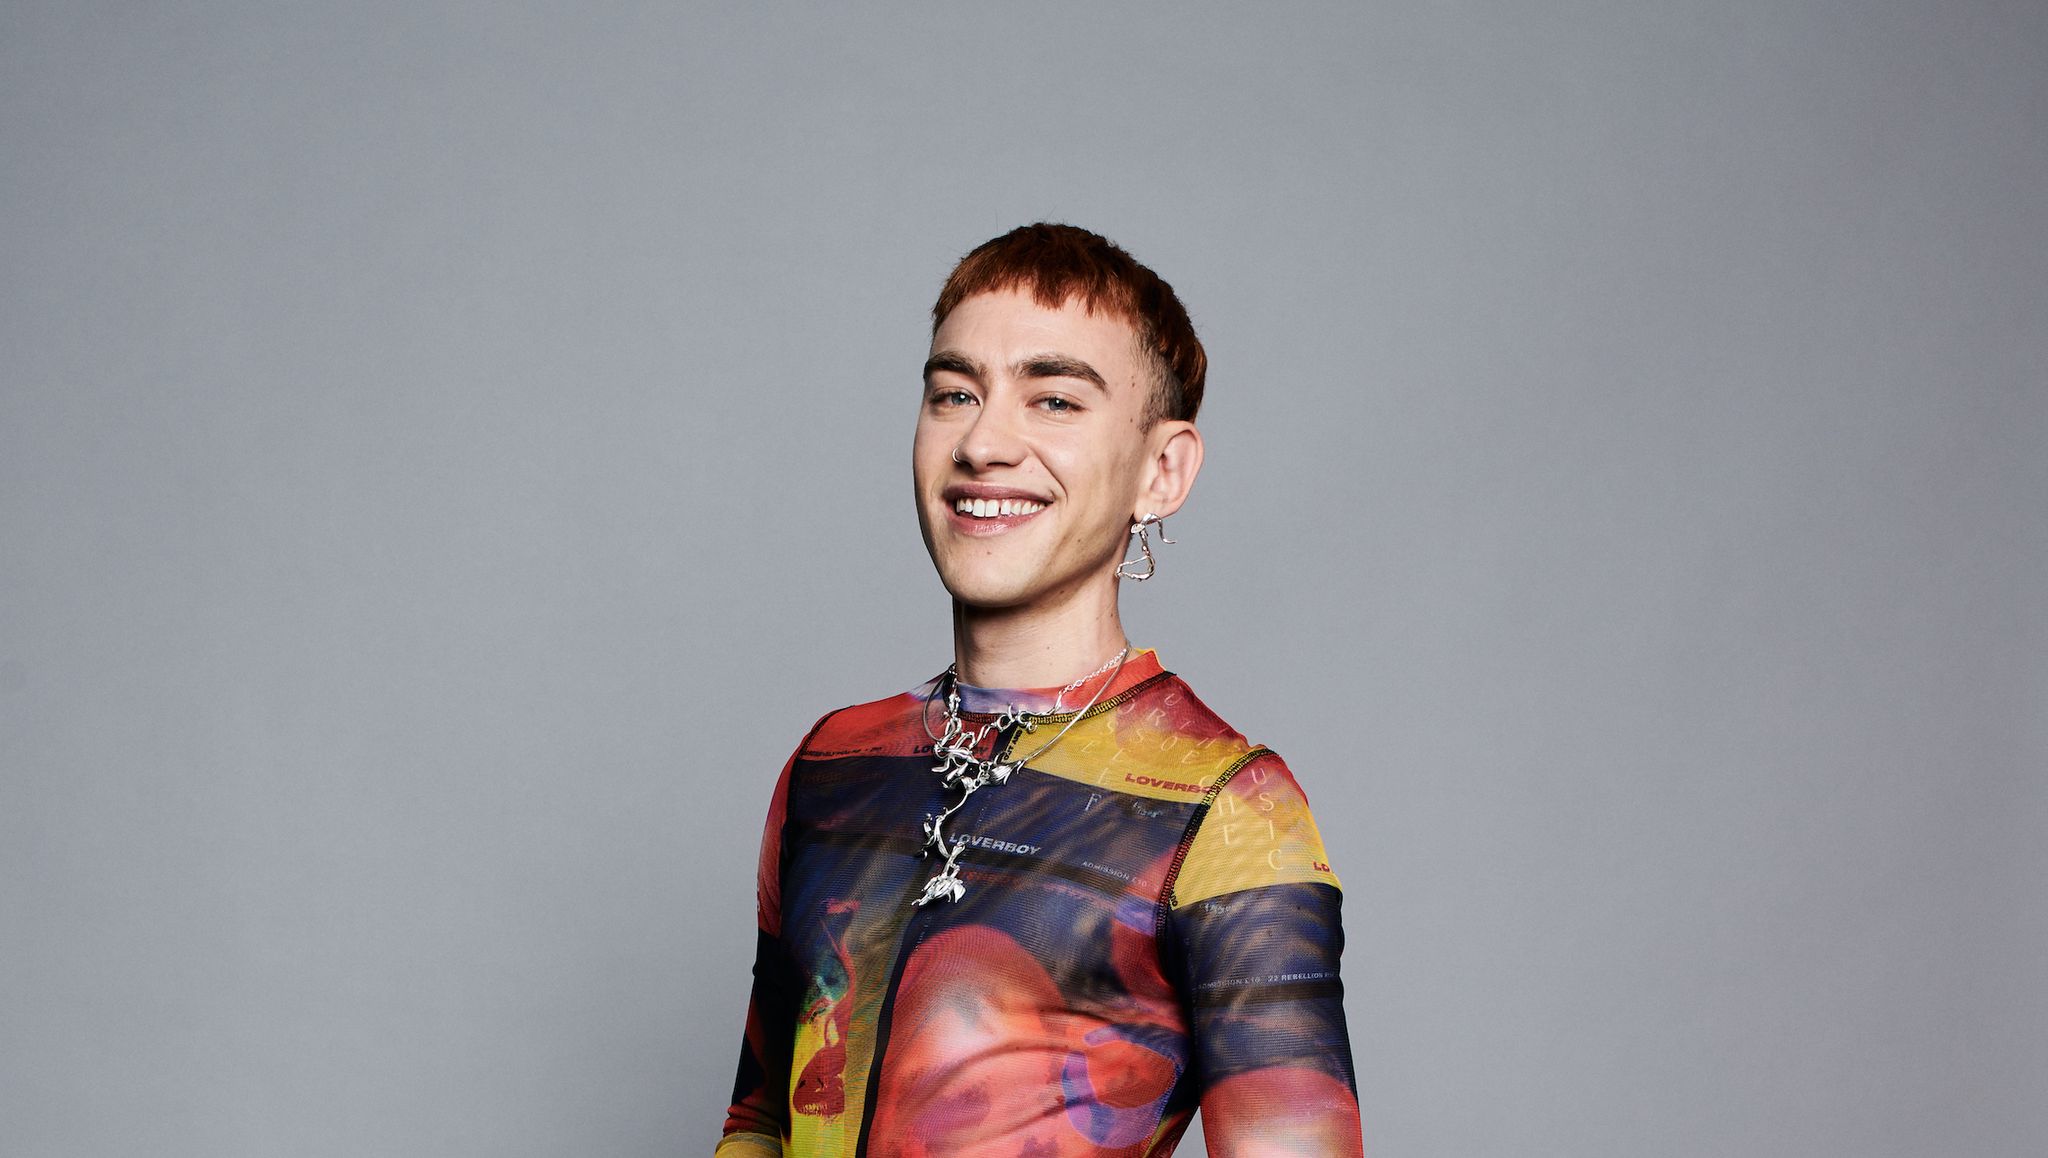 budapest, hungary november 14 editors note image has been digitally manipulated olly alexander poses during a portrait session at the mtv emas 2021 'music for all' at the papp laszlo budapest sports arena on november 14, 2021 in budapest, hungary photo by gareth cattermole mtvgetty images for mtv